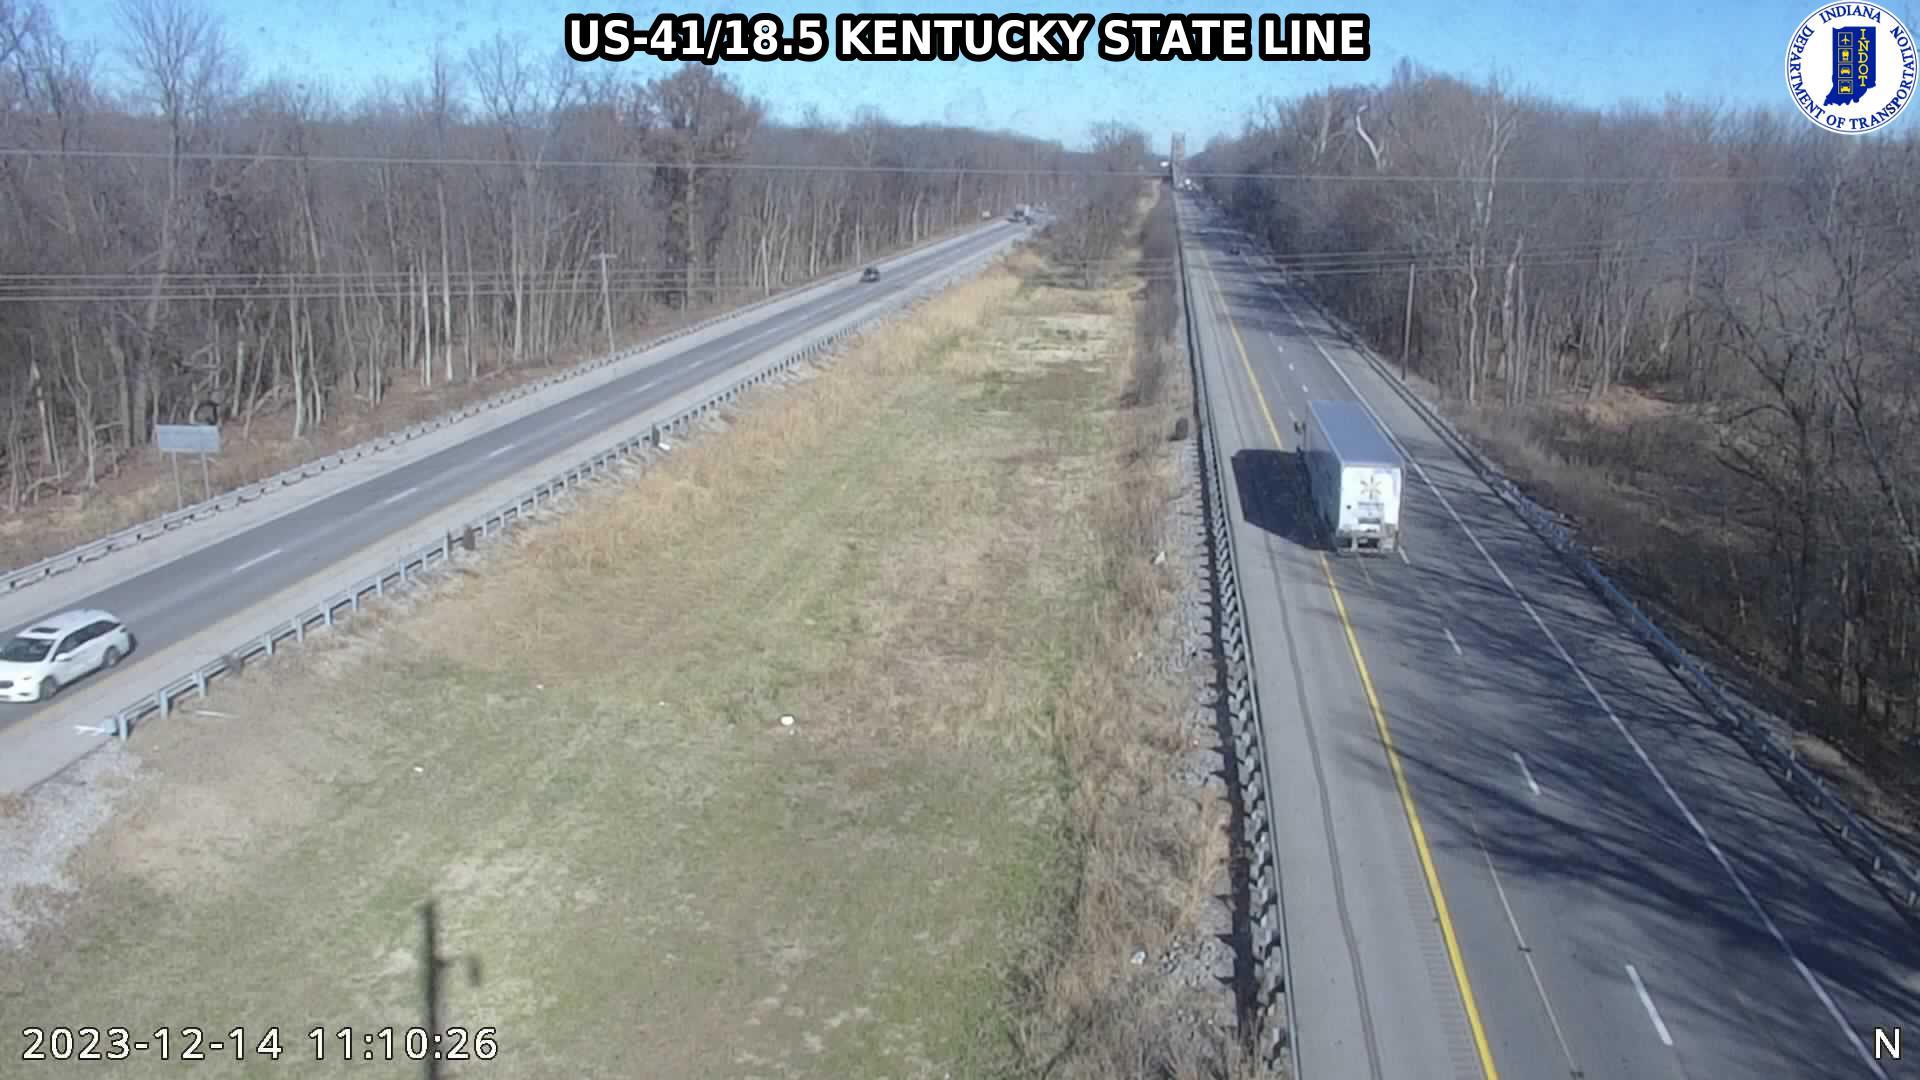 Traffic Cam Henderson: KY US-41: US-41/18.5 - STATE LINE: US-41/18.5 - STATE LINE